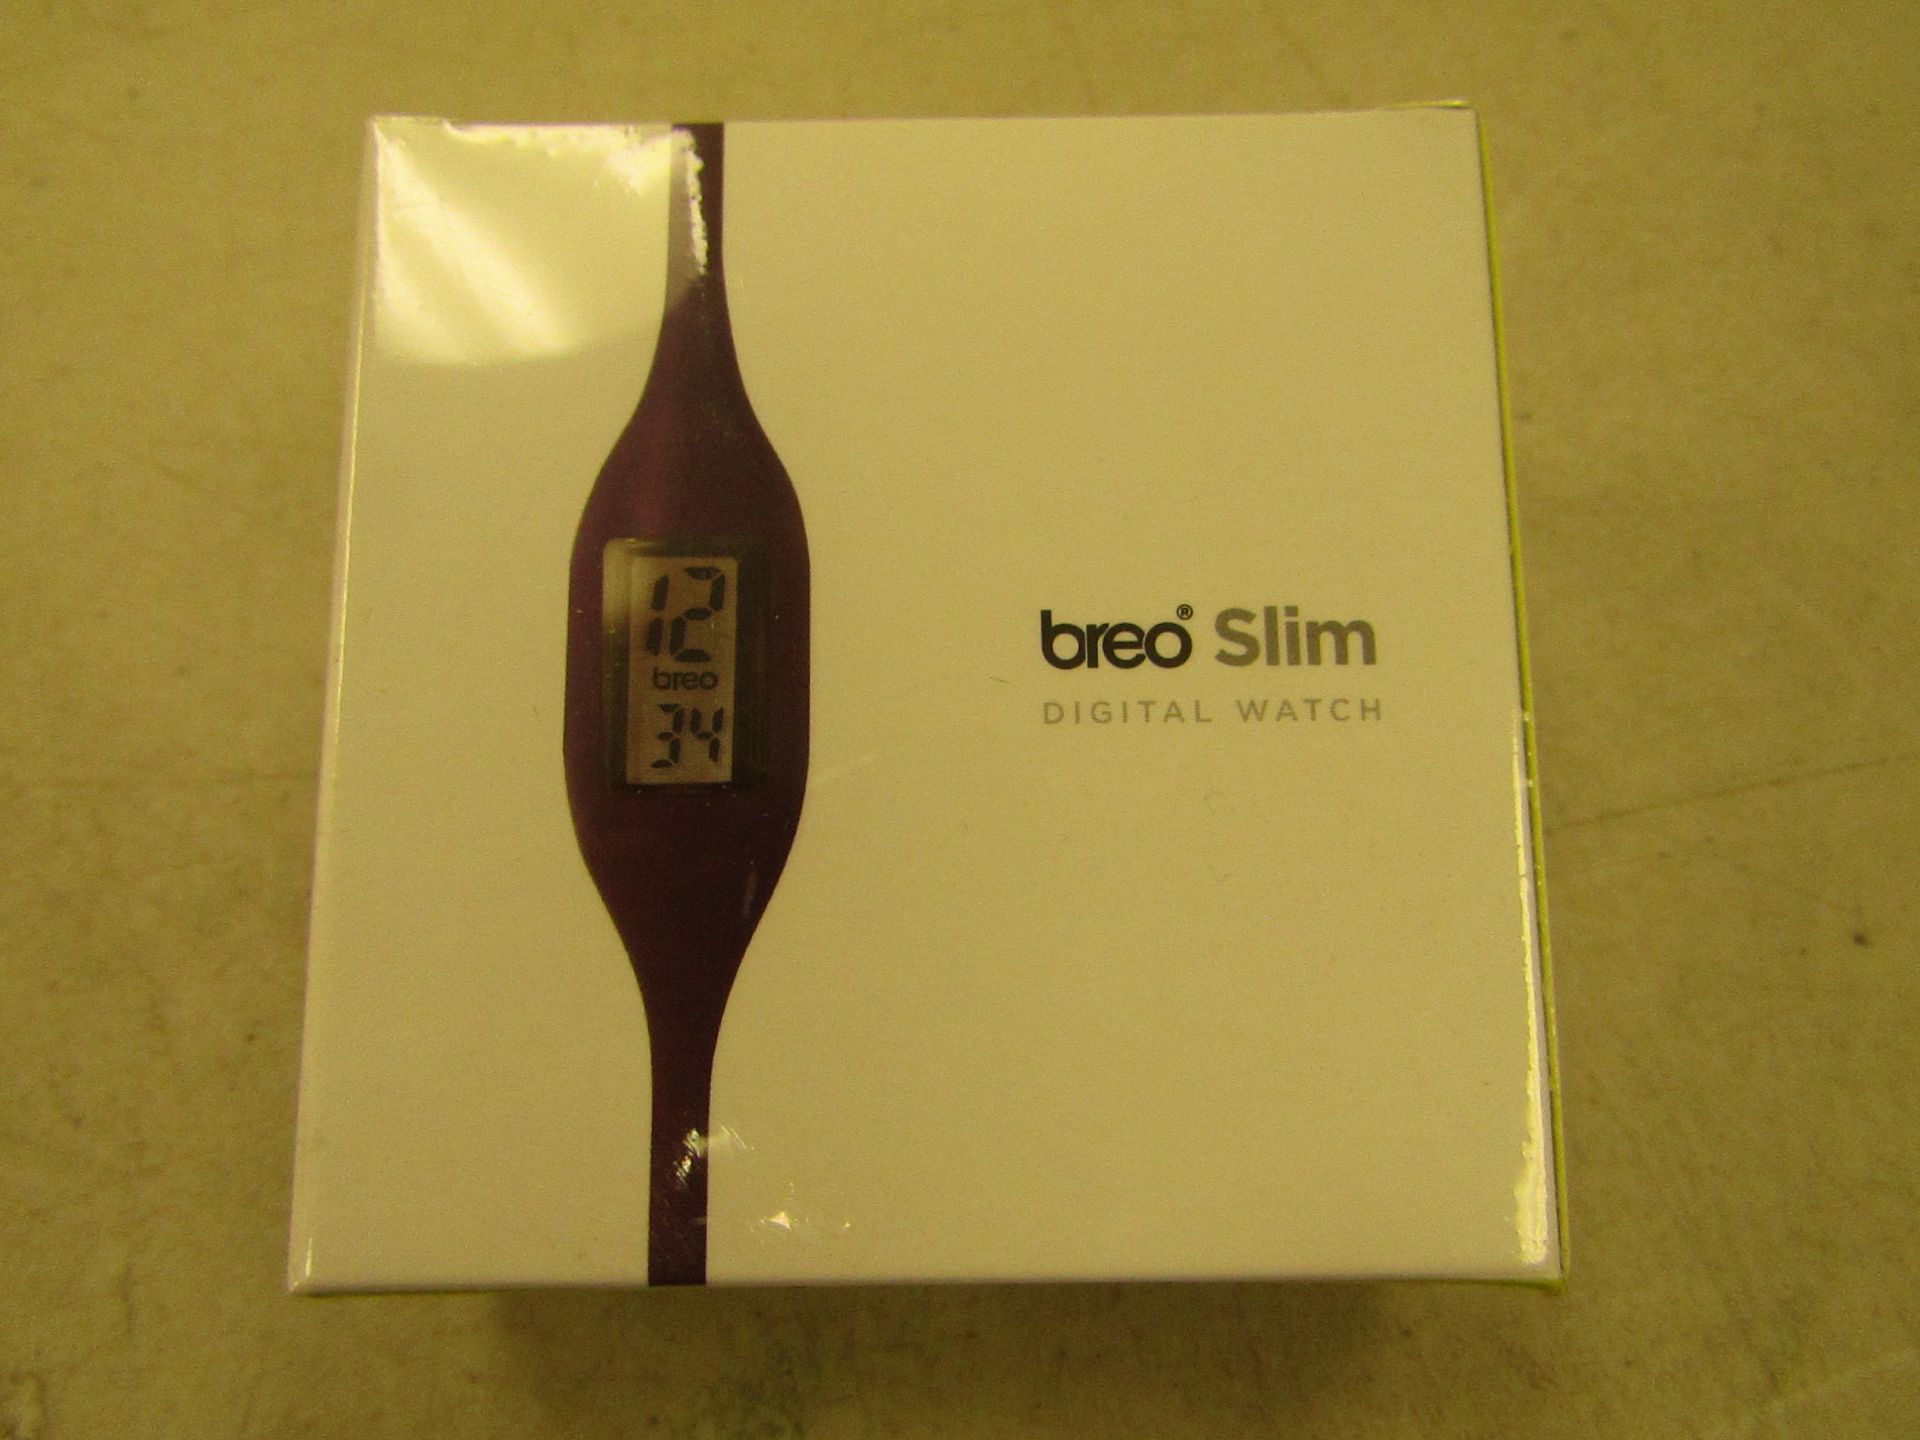 Breo Slim digital watch, new and boxed.